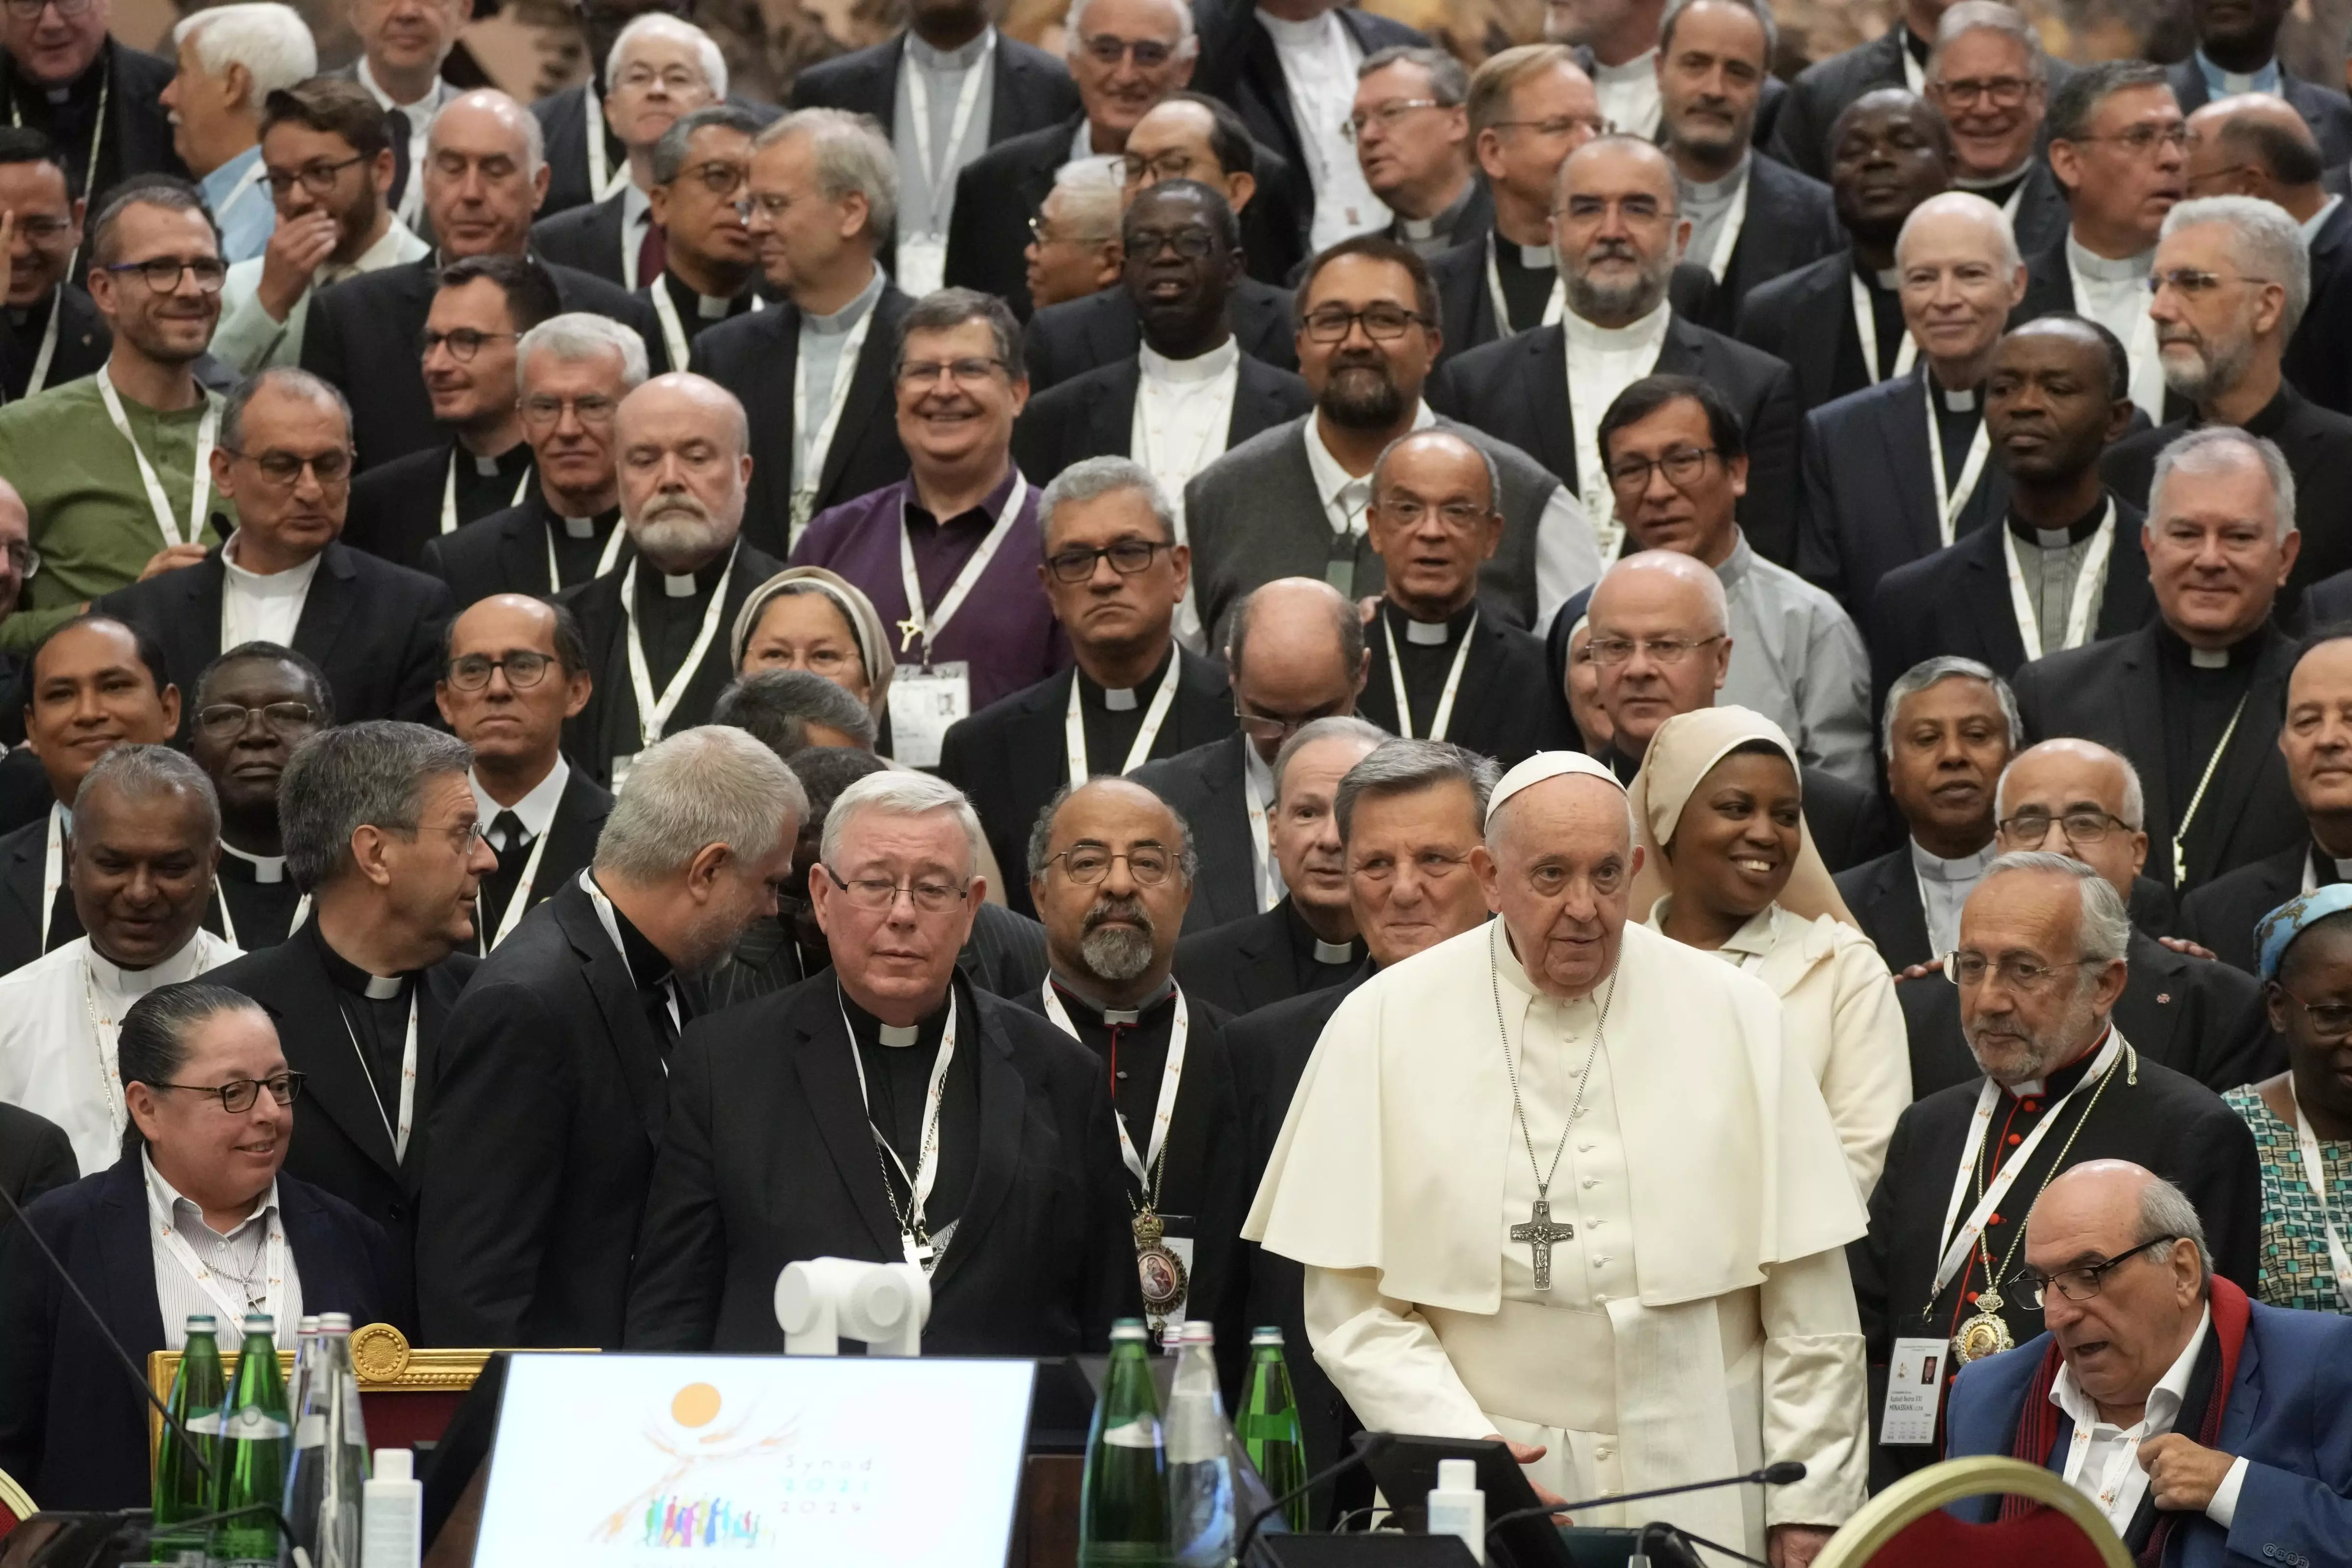 Popes meeting on Church future says its urgent to guarantee governance roles for women